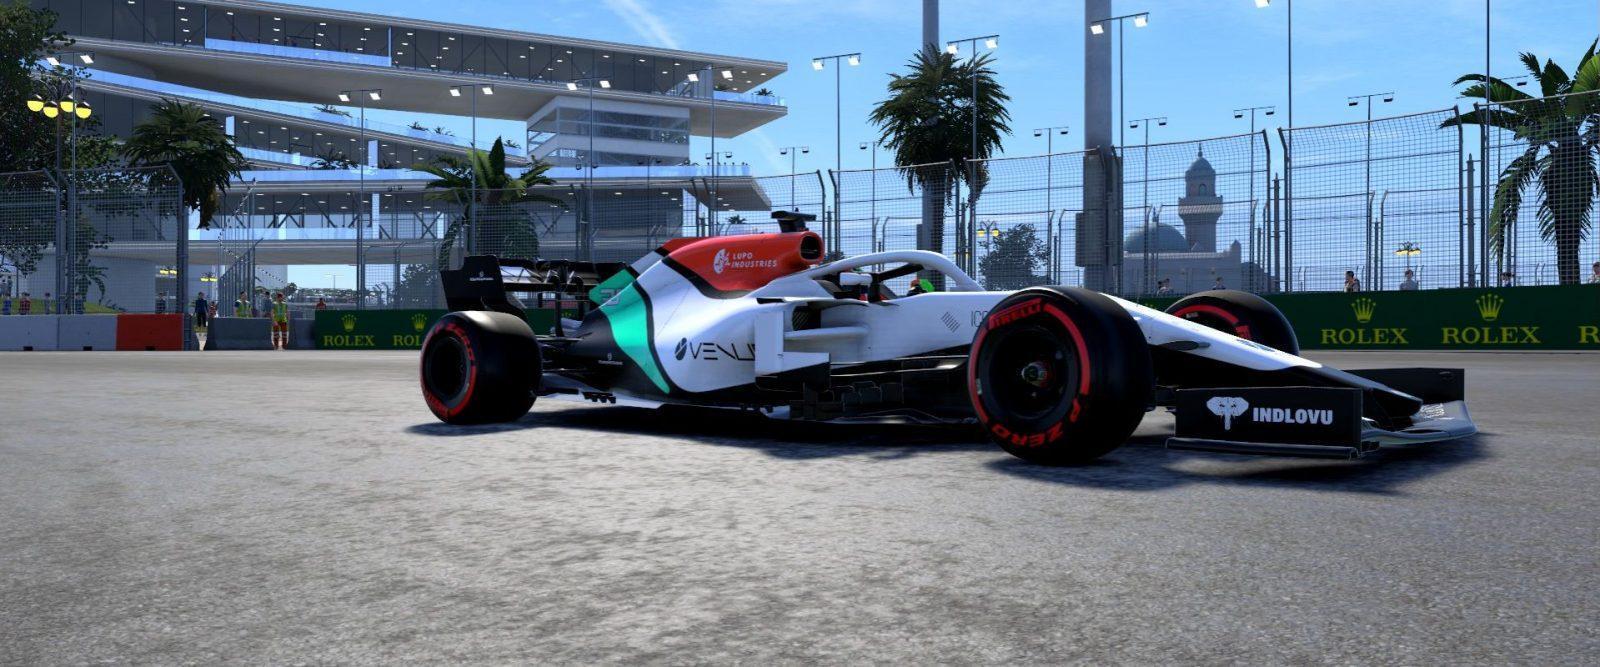 How to set up your car for Saudi Arabia in F1 2021